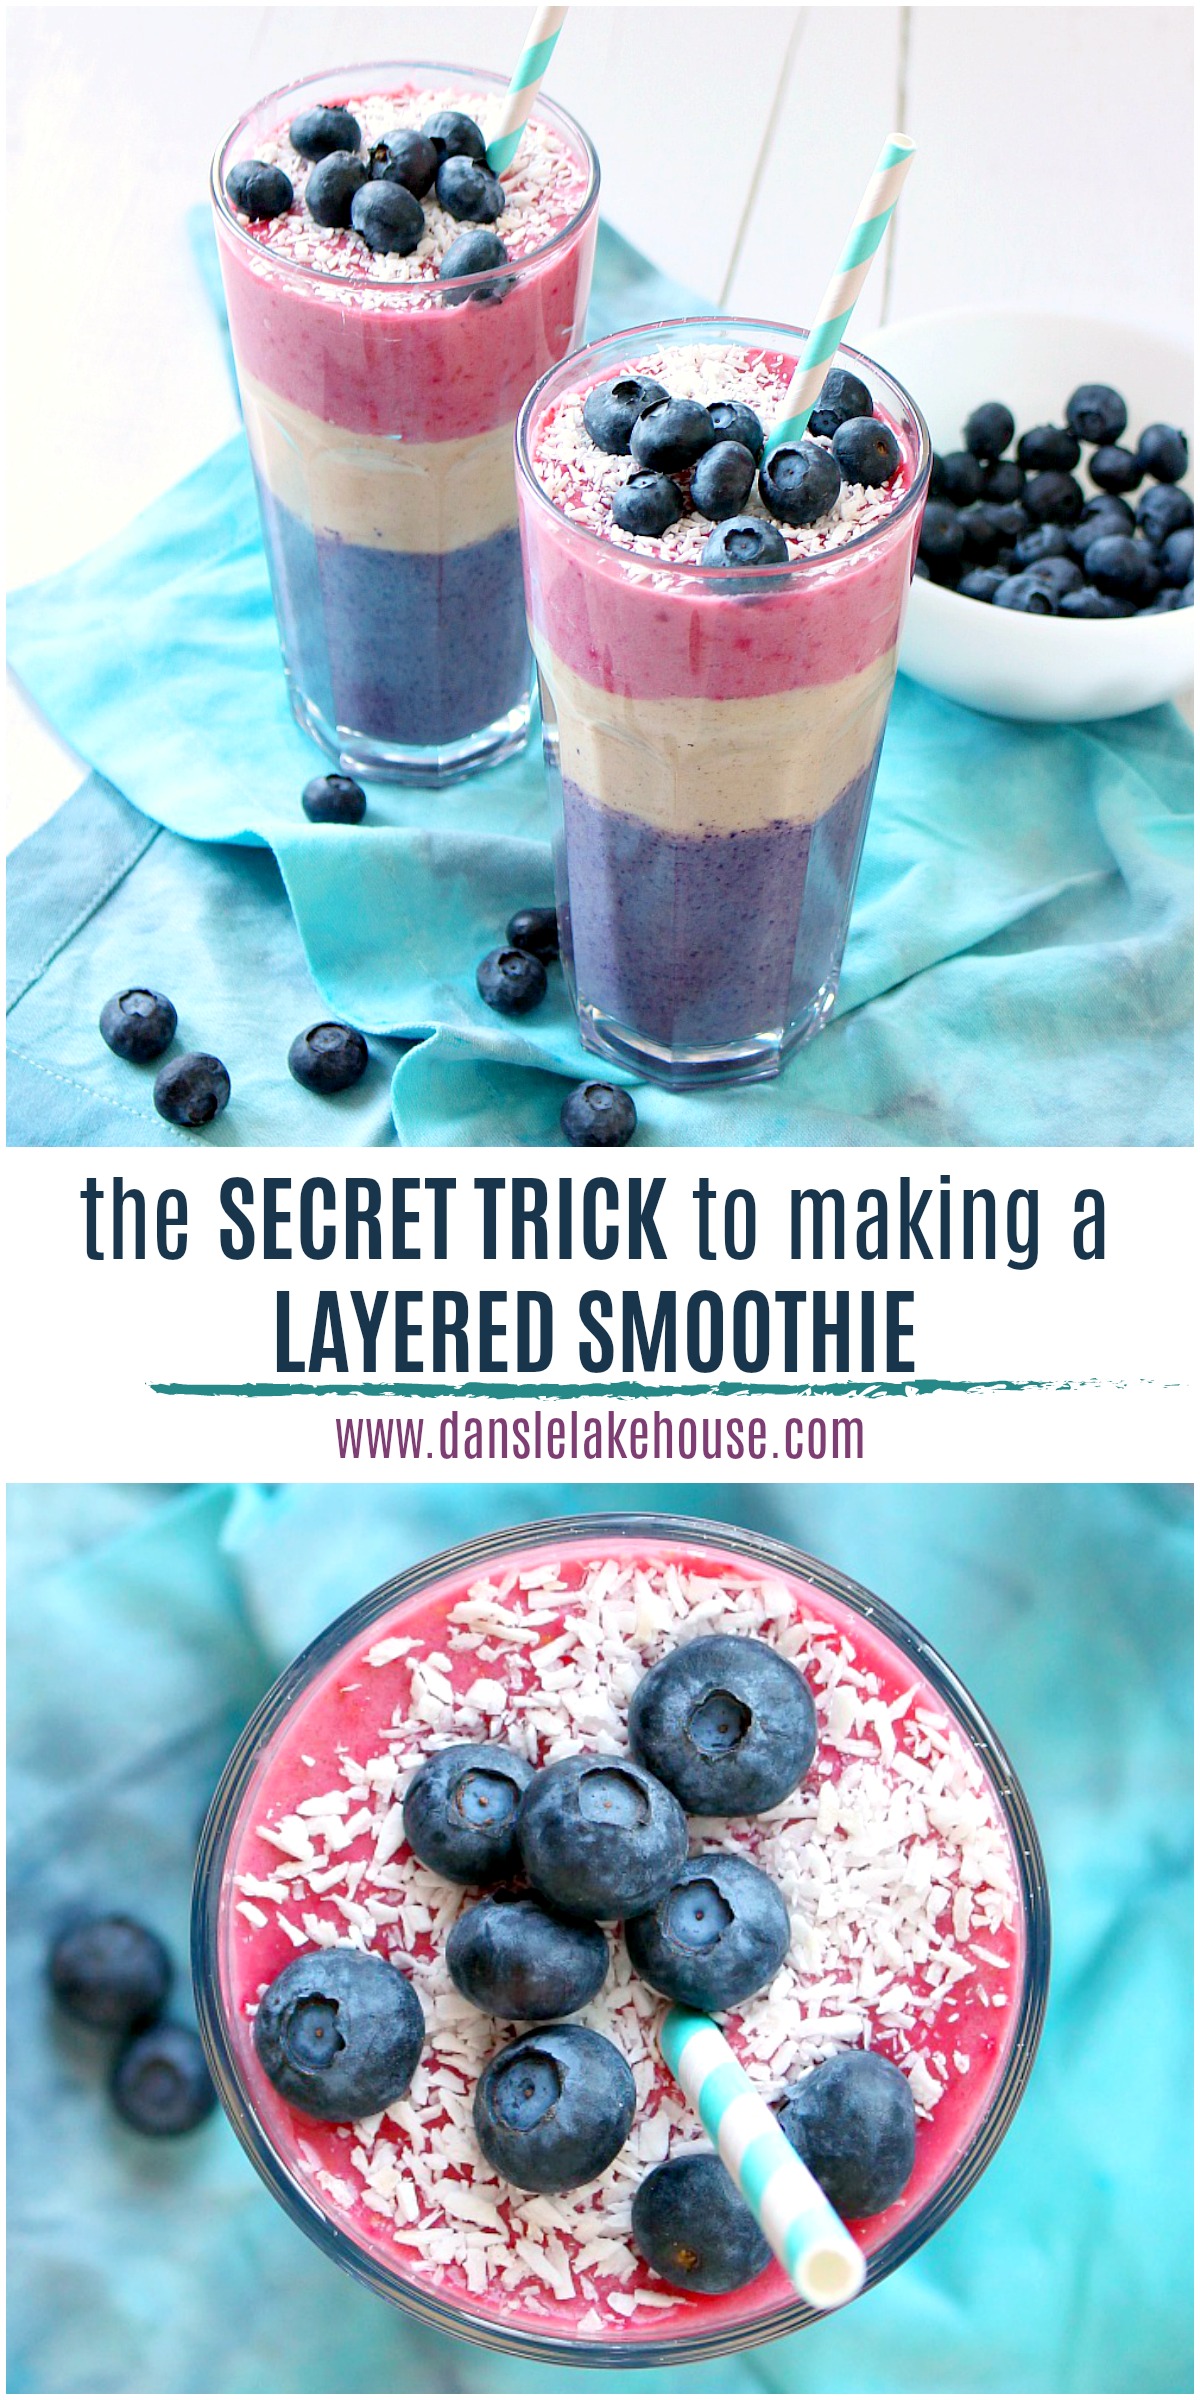 How to make a layered smoothie